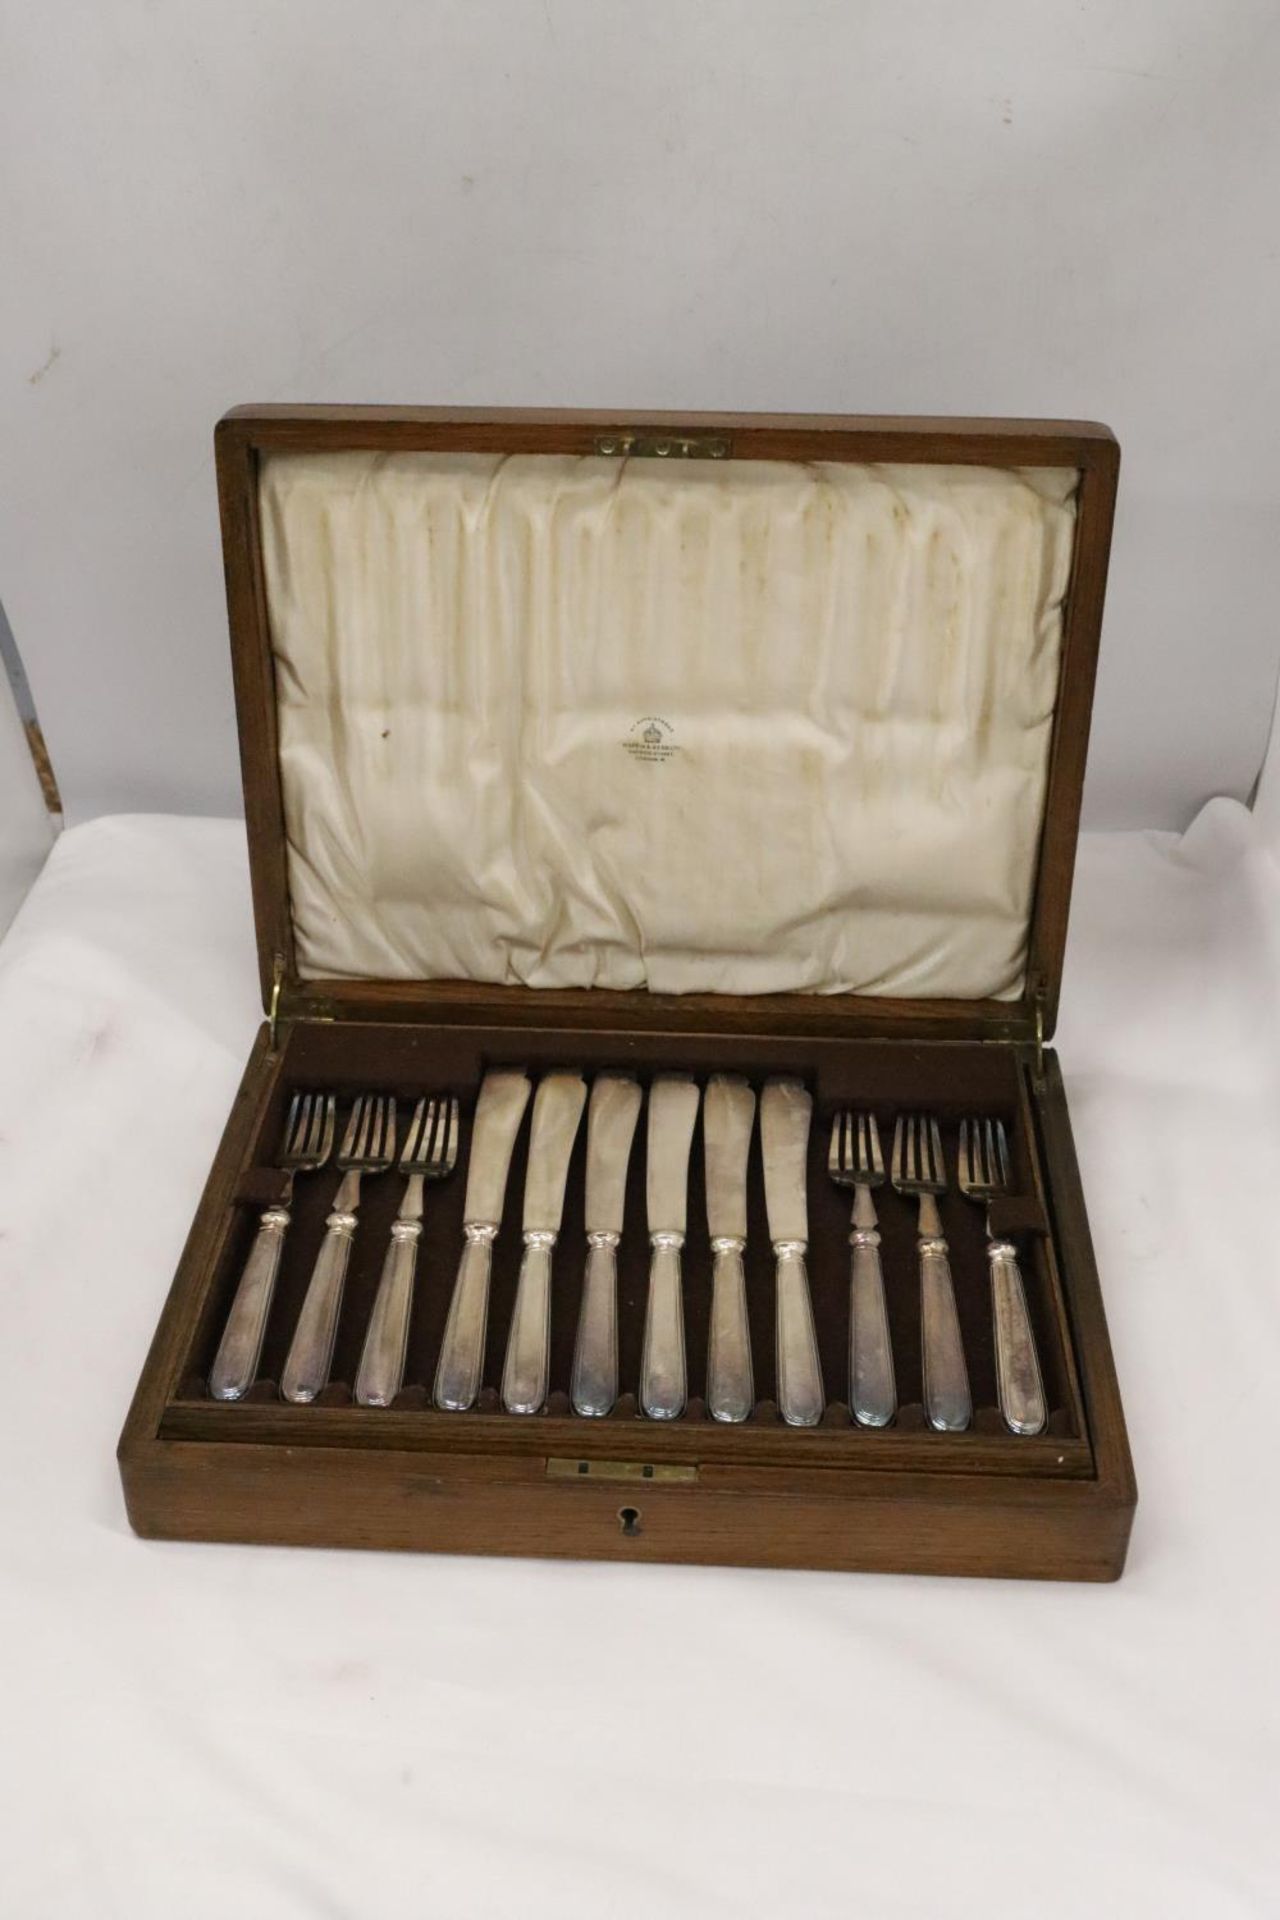 A VINTAGE MAPPIN AND WEBB KNIFE AND FORK SET IN A MAHOGANY CASE - Image 2 of 7